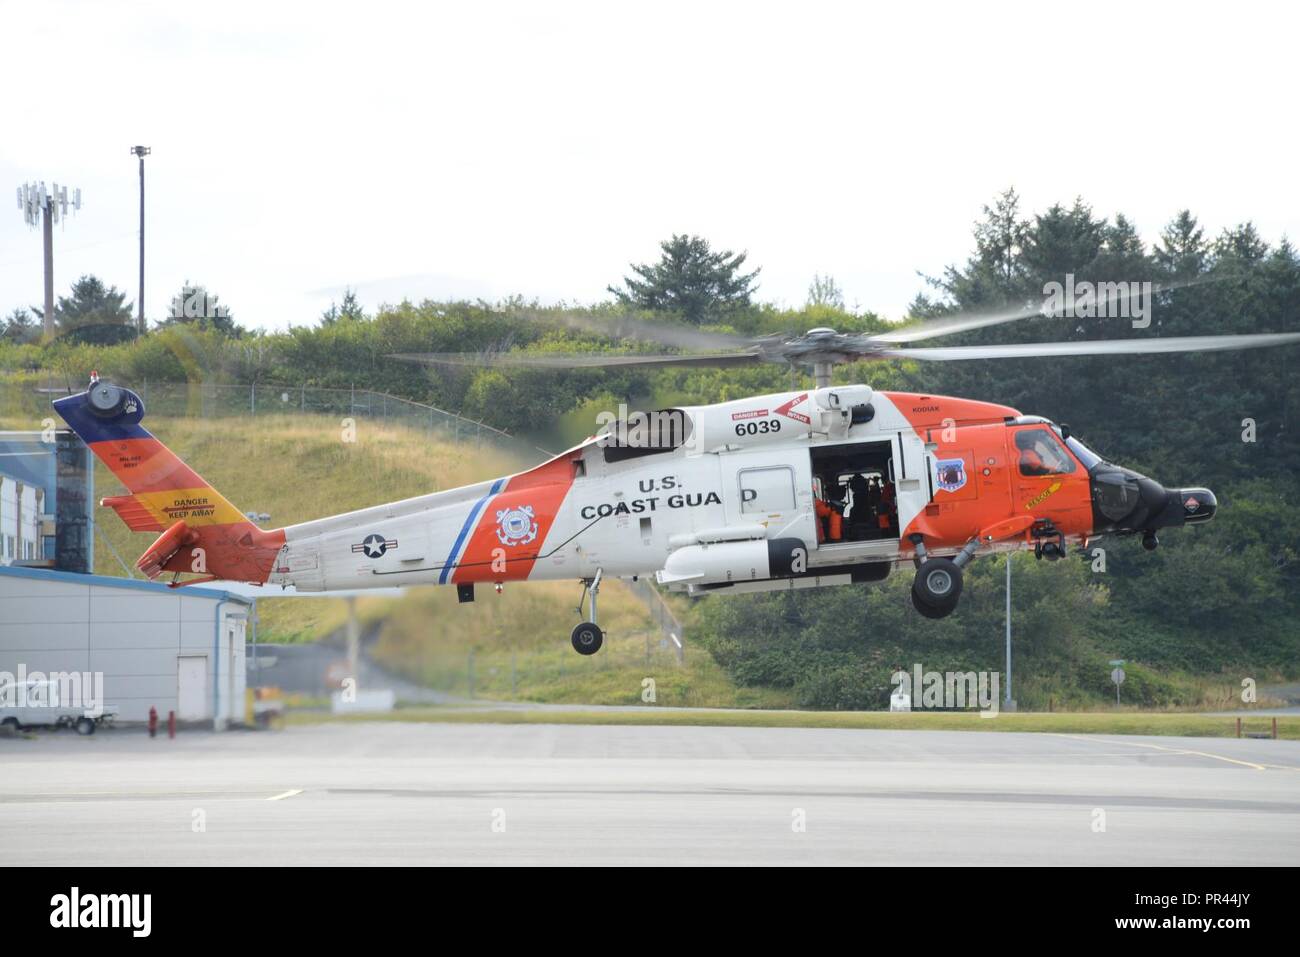 A Coast Guard Air Station Kodiak MH-60 Jayhawk helicopter aircrew hovers above the Air Station Kodiak, Alaska, tarmac before taking off for a training flight Sept. 6, 2018. Training flights ensure aircrews are proficient in emergency procedures and maintain qualifications so they are ready and responsive during search and rescue cases. U.S. Coast Guard Stock Photo